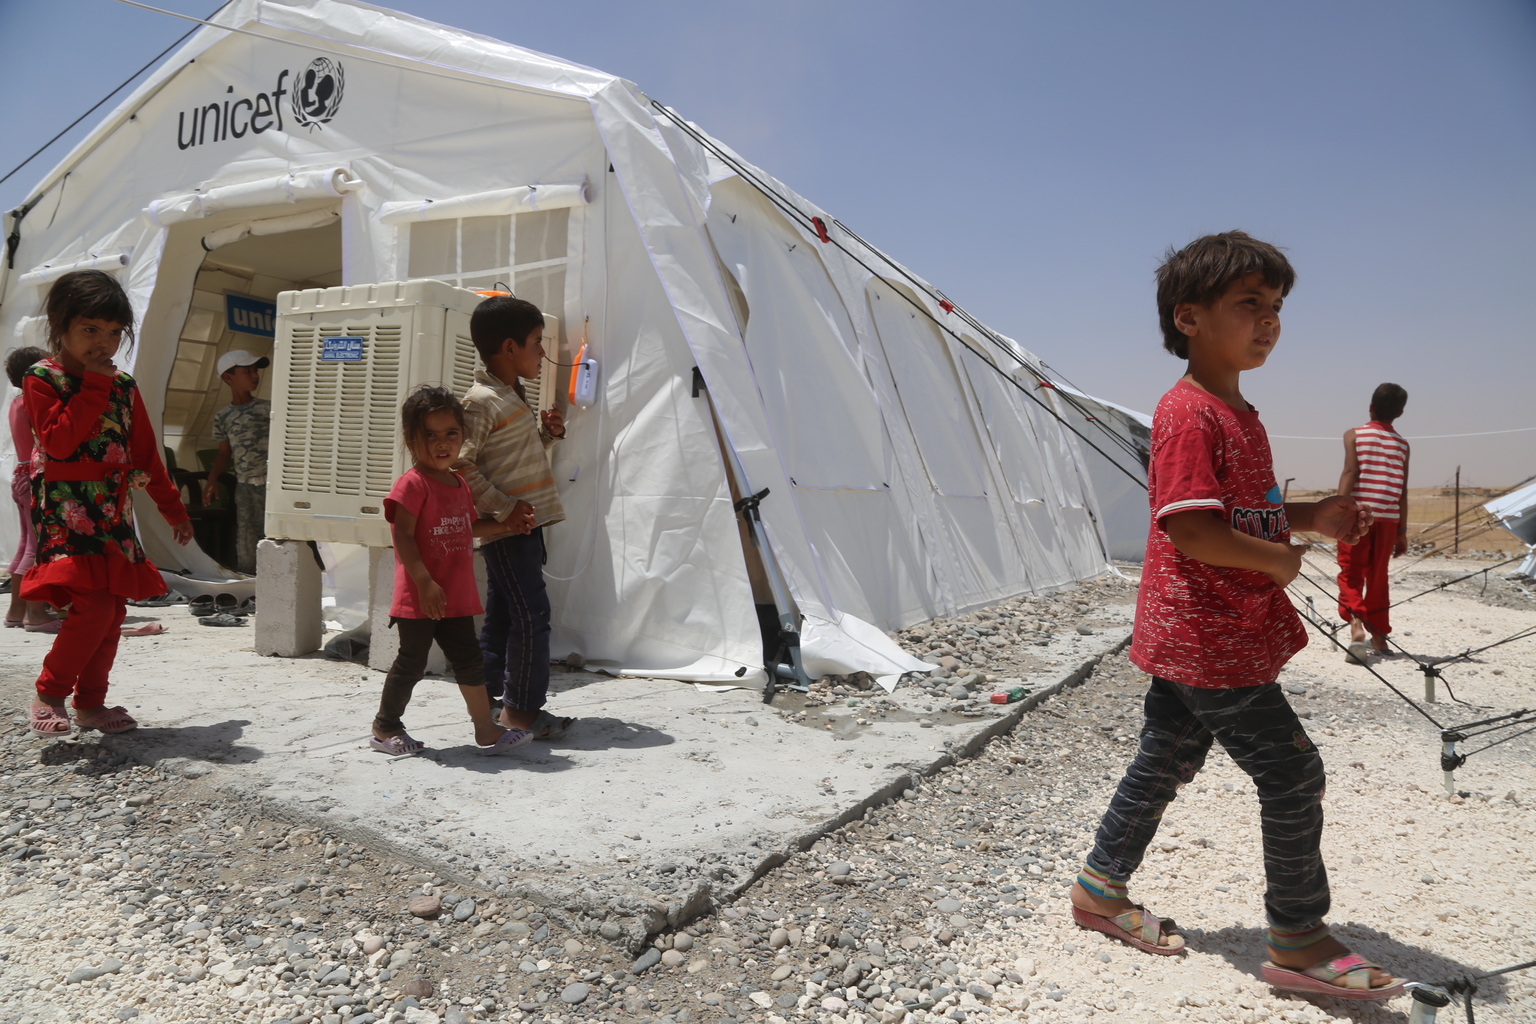 On 4 July 2017 in Ain Issa camp in the Syrian Arab Republic, displaced children from Raqqa leave a UNICEF child-friendly space which offers and a wide range of recreational activities. More than 6,600 people live in harsh desert conditions, as violence continues in the area. Since November 2016, unrelenting violence in the north eastern governorate of Raqqa has displaced over 200,000 people, almost half of whom are children. Intensified attacks have destroyed infrastructure and shattered civilian lives. Families are seeking safety in temporary shelters, with little access to basic services. In Ain Issa camp, UNICEF has set up six child-friendly spaces for learning and playing and is providing psychological support to more than 400 children to help them cope with the traumas they have faced and to regain a sense of structure and normality. In response to the needs of vulnerable families in the area, UNICEF is trucking in water daily to internally displaced people in camps in Raqqa and Hassakeh, including Maouka, Al-Hol and Ain Issa. UNICEF has installed latrines, showers and water storage tanks in the camps and is distributing family hygiene kits to protect children against waterborne diseases. Mobile health clinics have been set up to provide primary health care, including vaccinations for children and their mothers. Nutritional supplements are distributed on a regular basis.